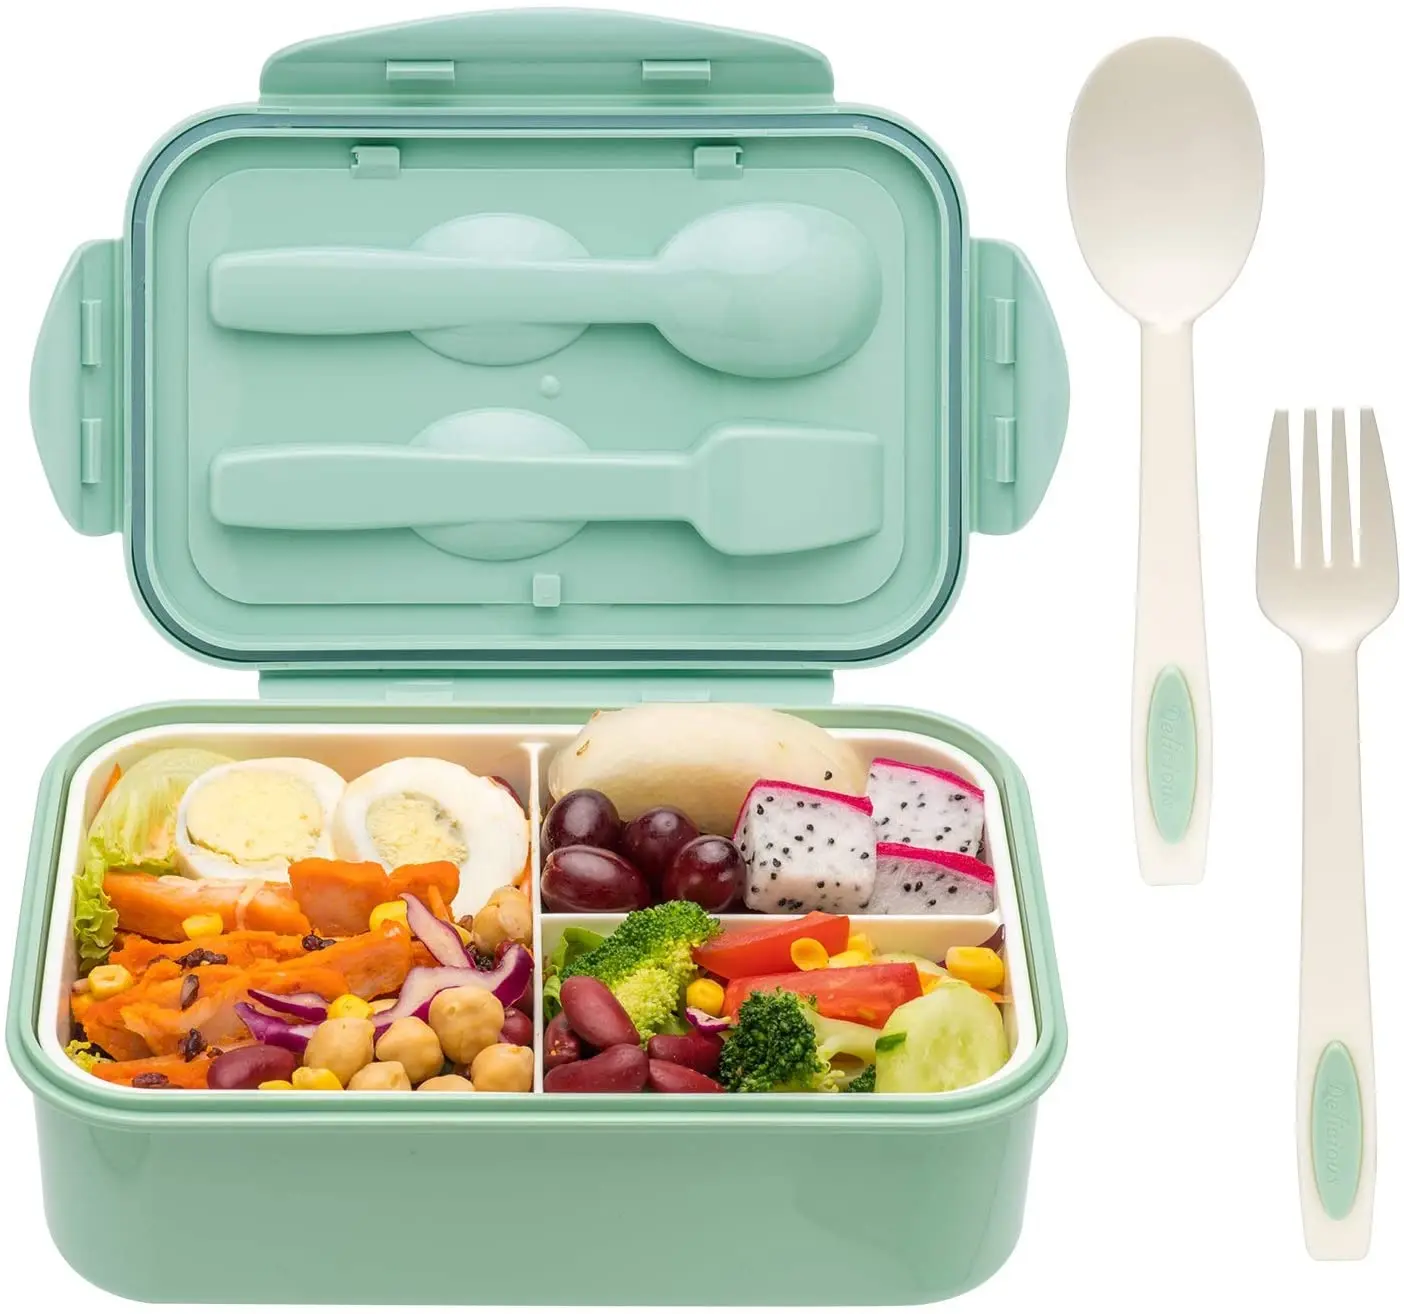 

Amazon Best Seller Bento Lunch Box For Adults And Children,Durable Leak-proof For On-the-go Meal Bpa-free Kids Bento Box, Pink/green/beige